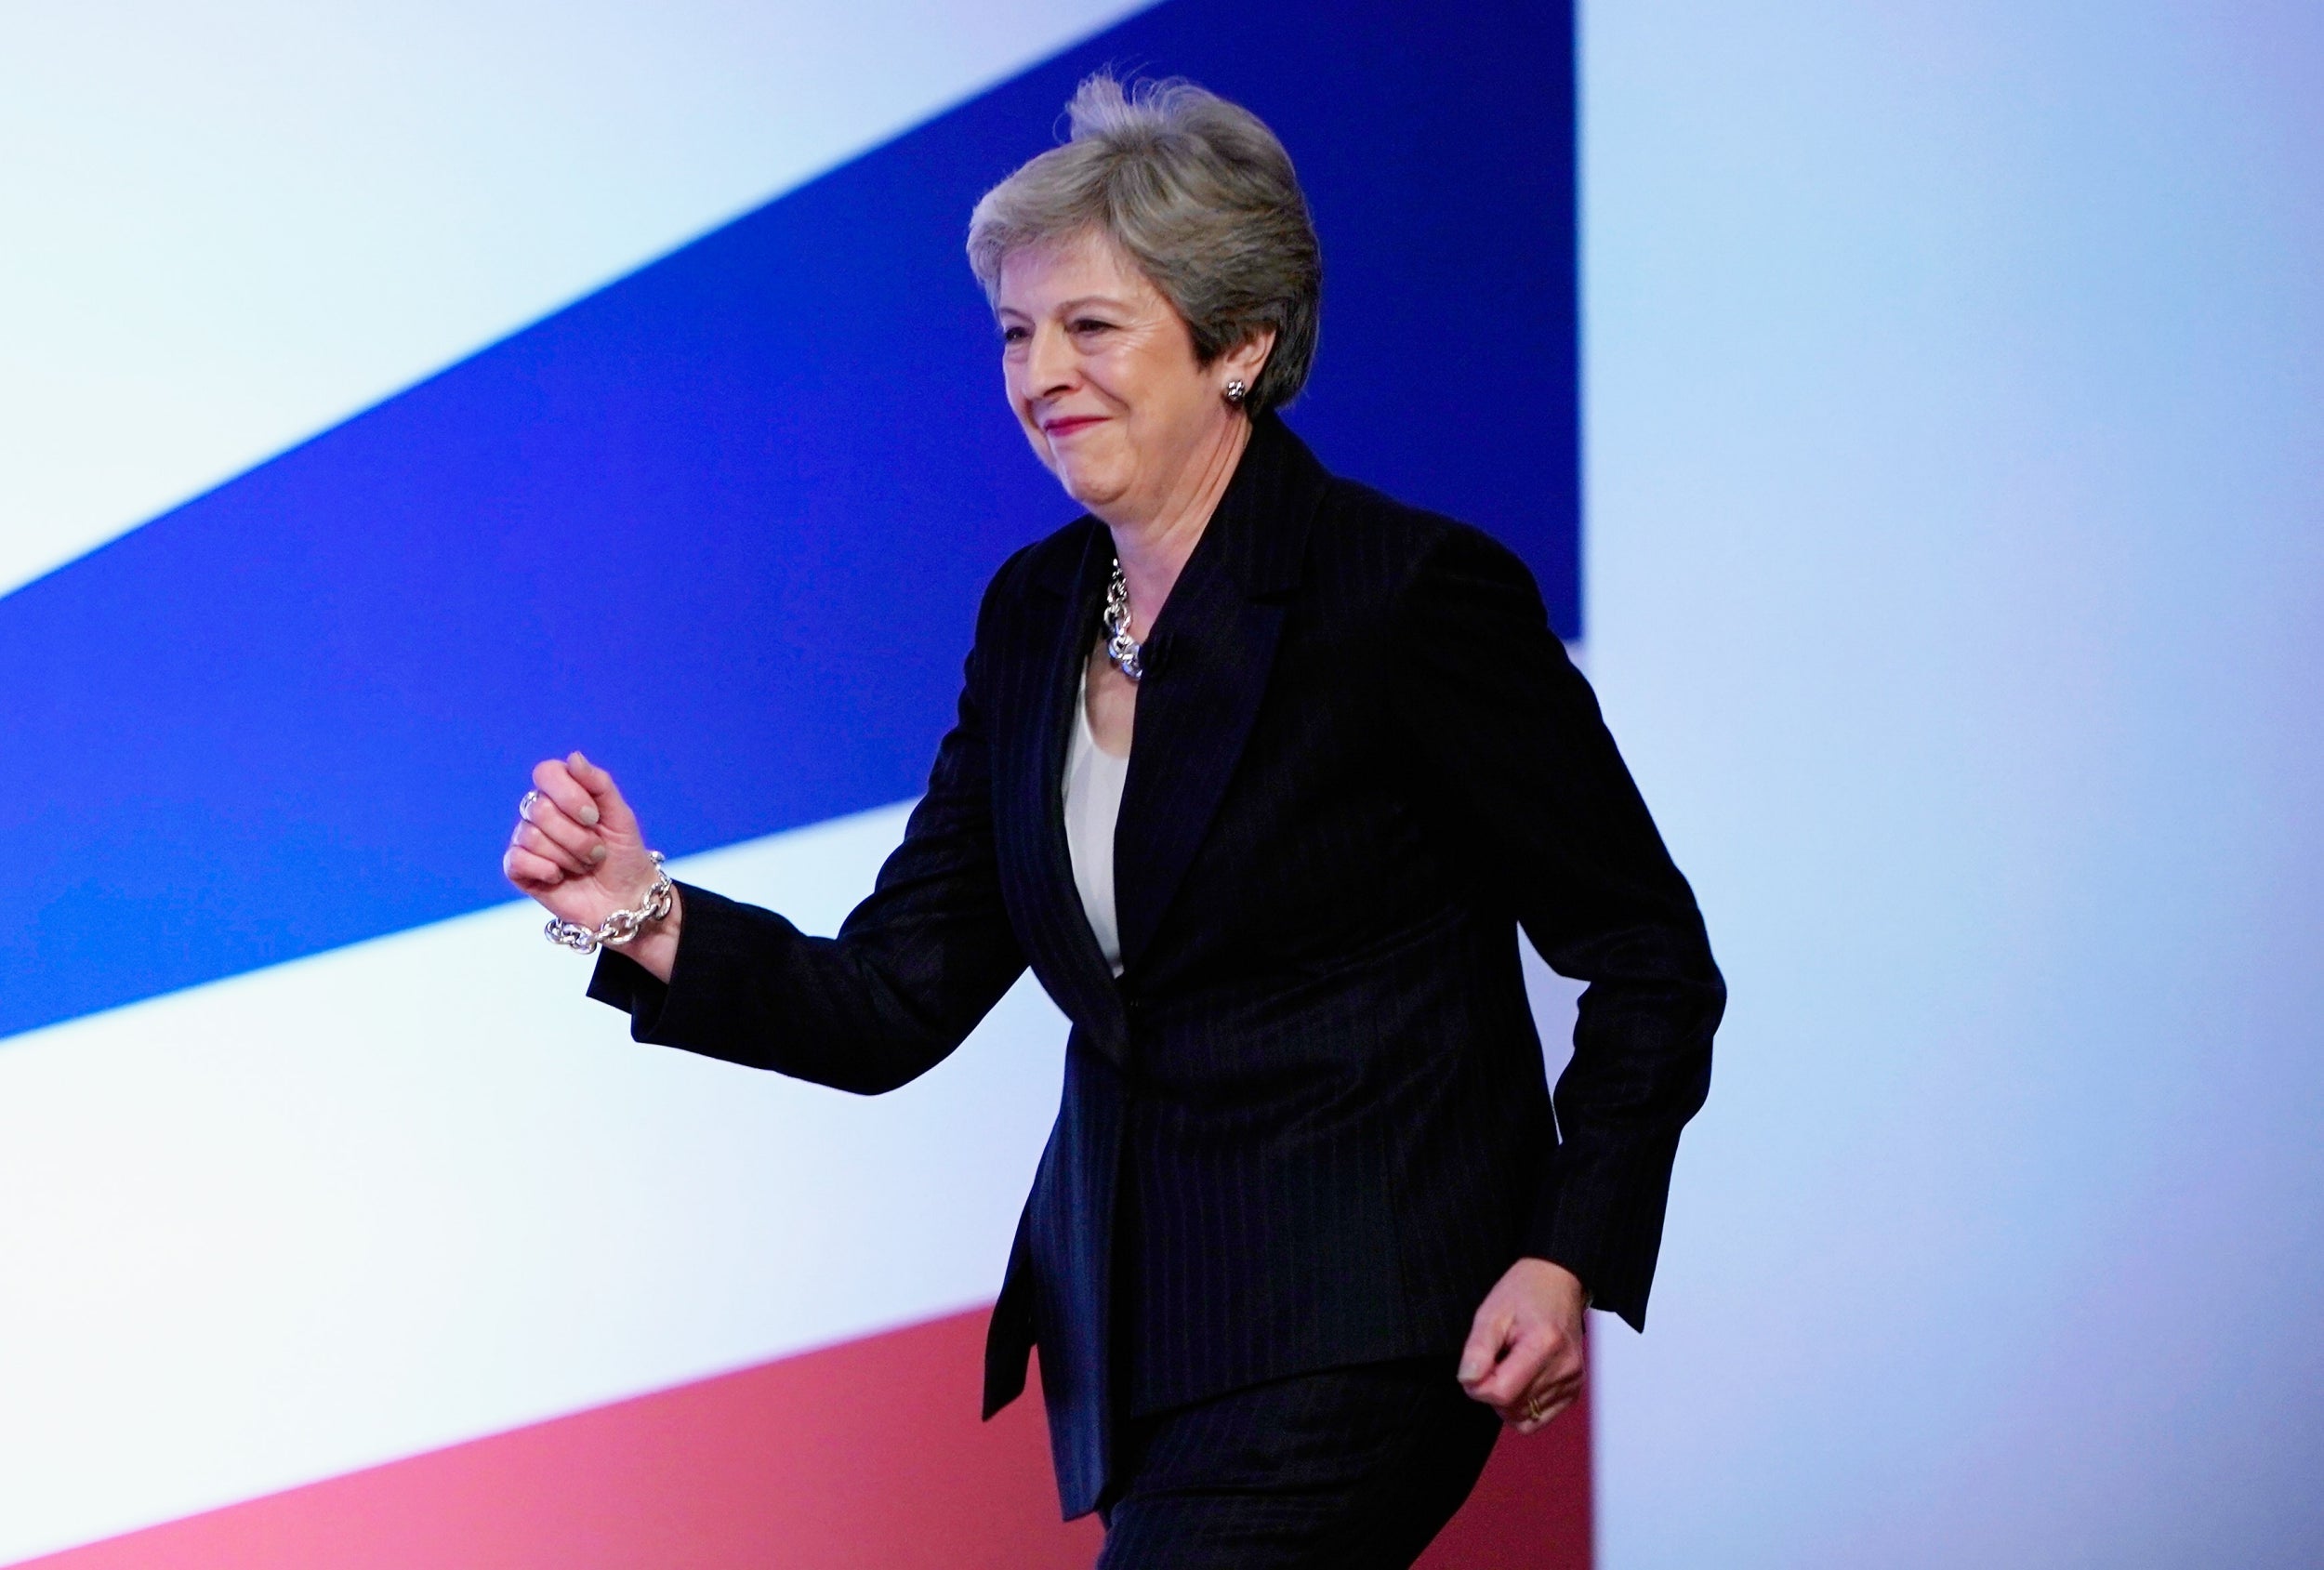 The prime minister's dance moves to an Abba classic at the Conservative Party conference, prompted Alastair Campbell to persuade the band to object